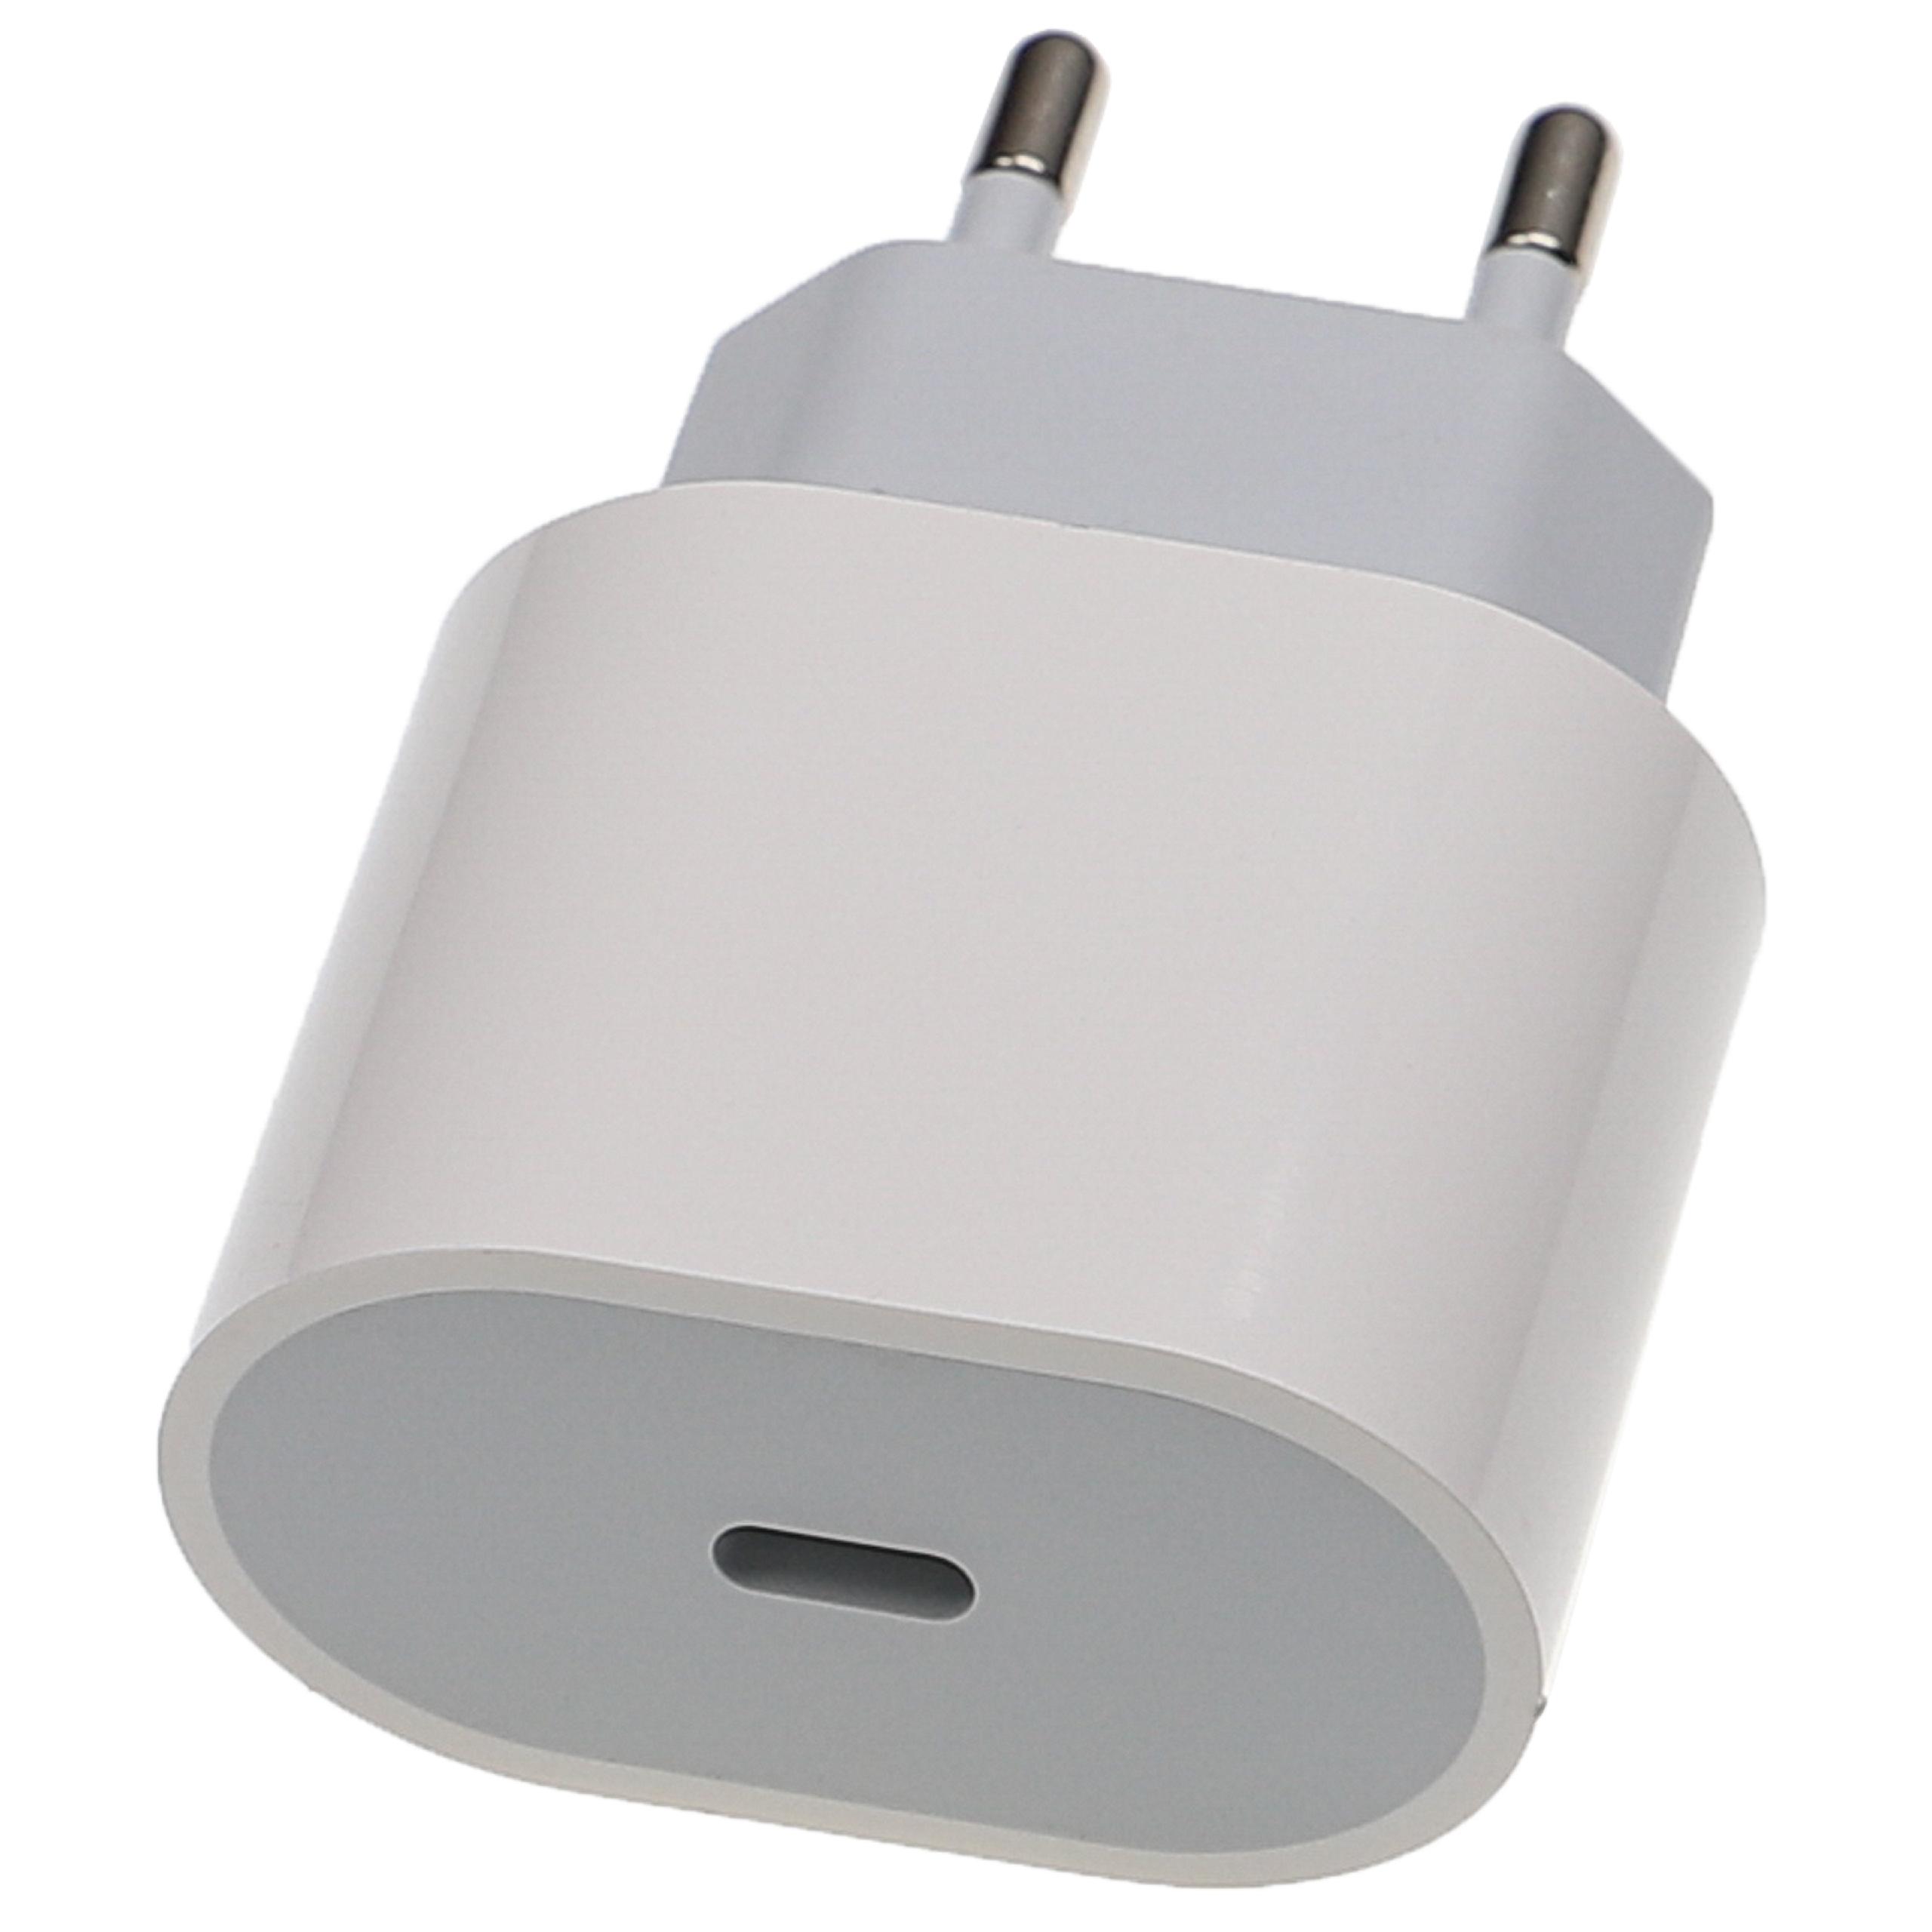 USB C USB Power Adapter for Smartphones, Mobile Phones, Tablets - USB Chargers, 9 / 12 / 5 V Adapter